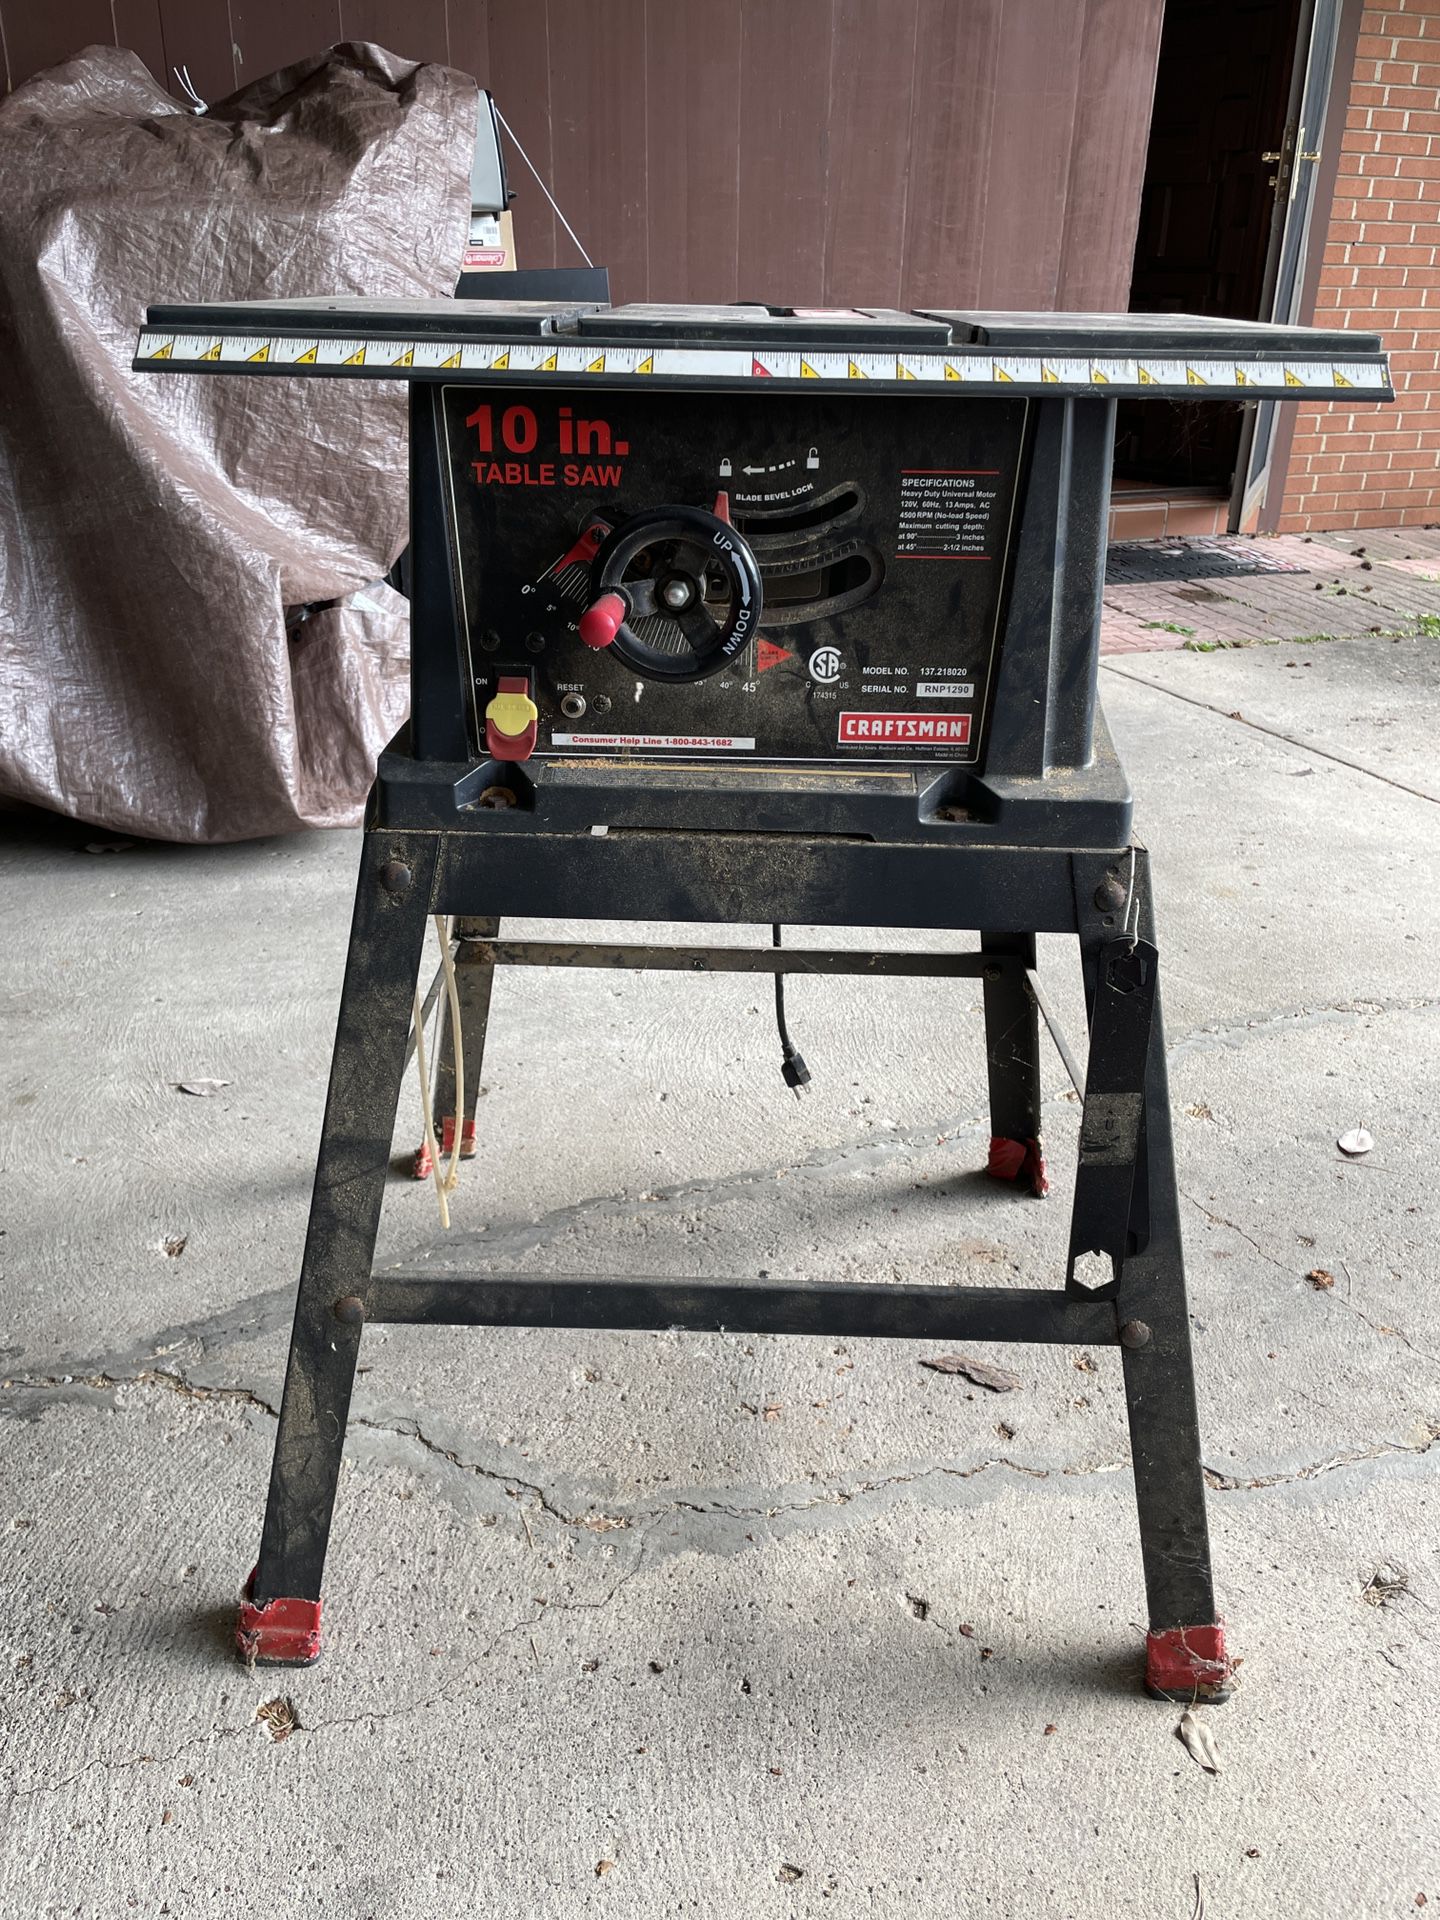 Table Saw Craftsman Tablesaw 10 in. Crafts man Ten Inch WORKING (pickup only)